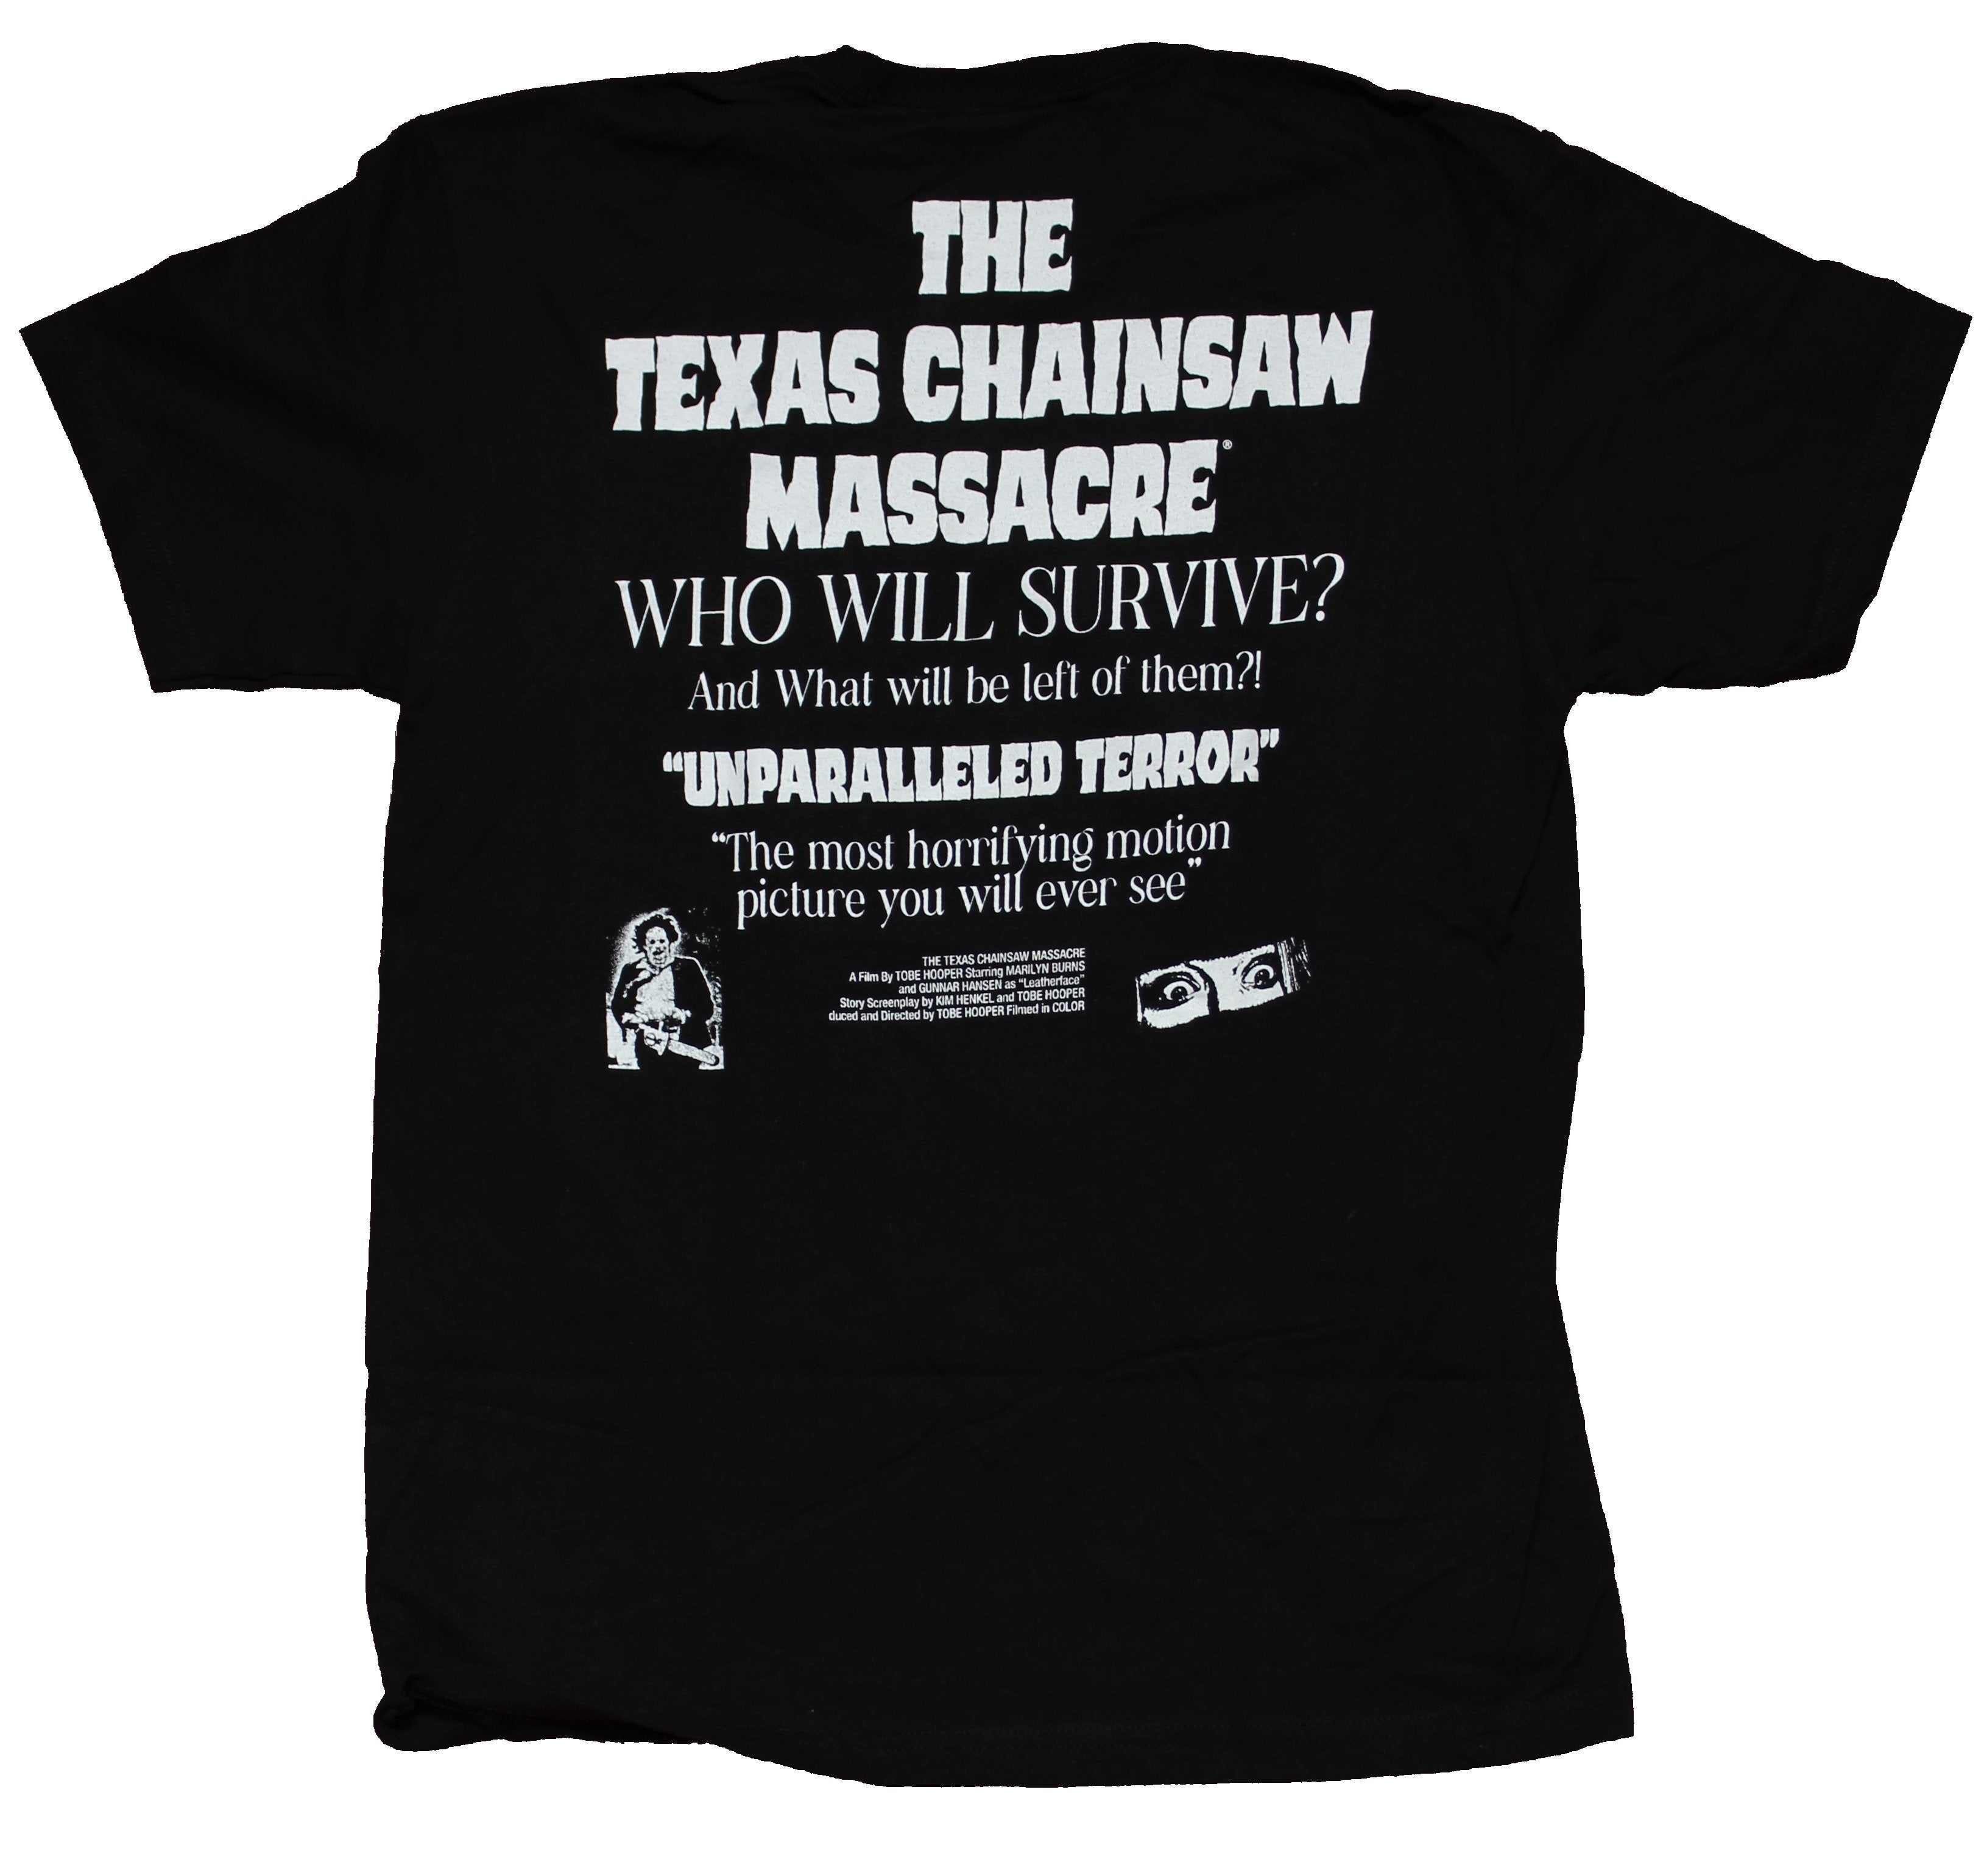 Texas Chainsaw Massacre Mens T-Shirt - Leatherface Closeup and Running